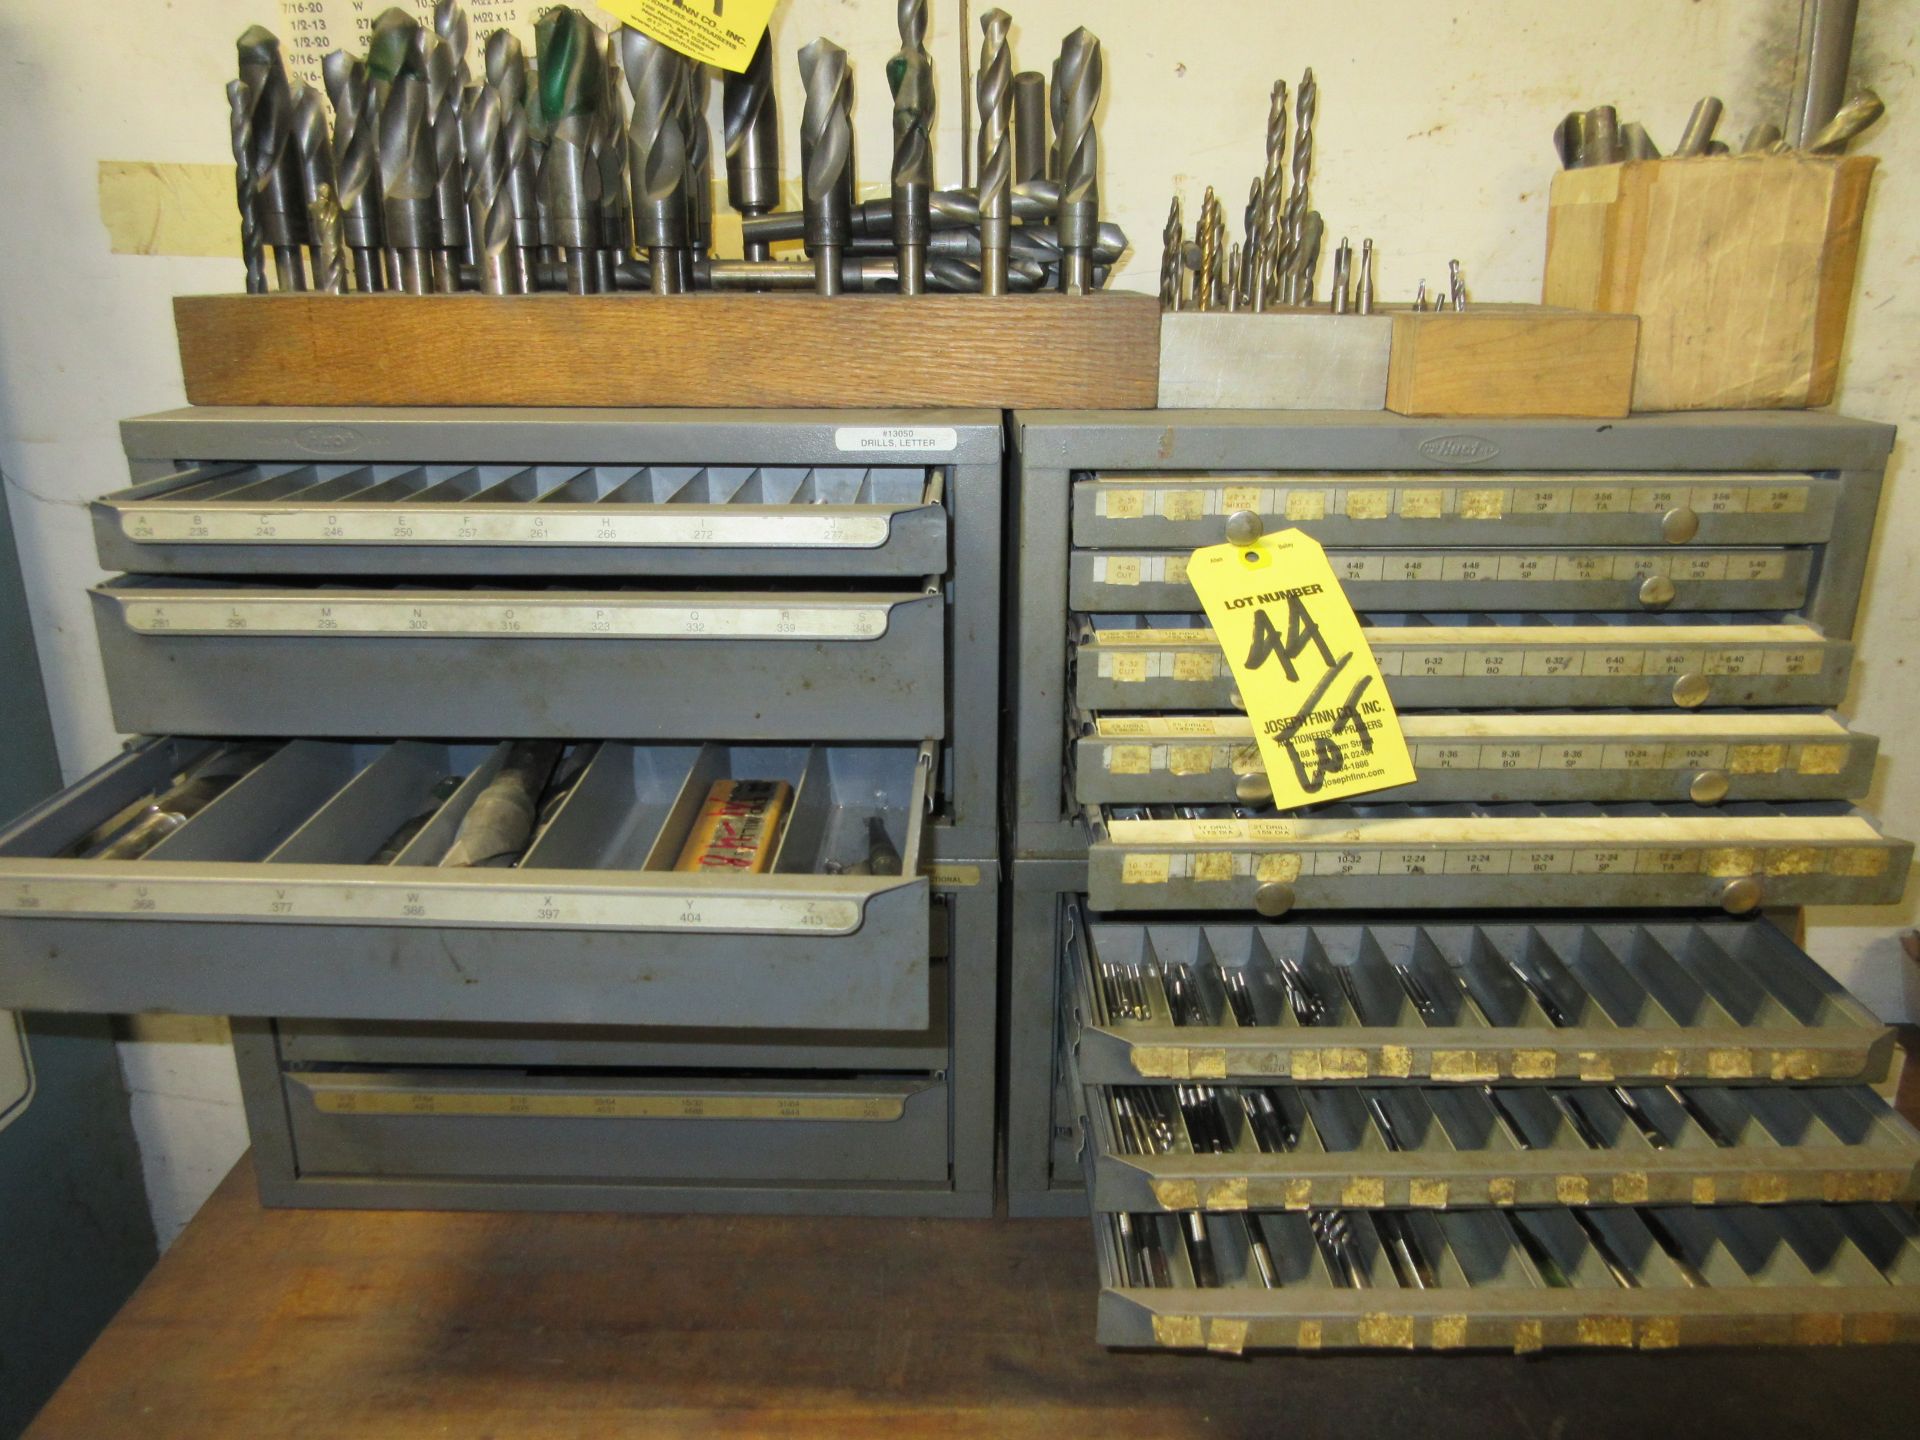 LOT (4) Huot Drill Index Cabinets w/ Large Drills, Rough Cutters, Reamers, Drills Along Top - Image 2 of 5